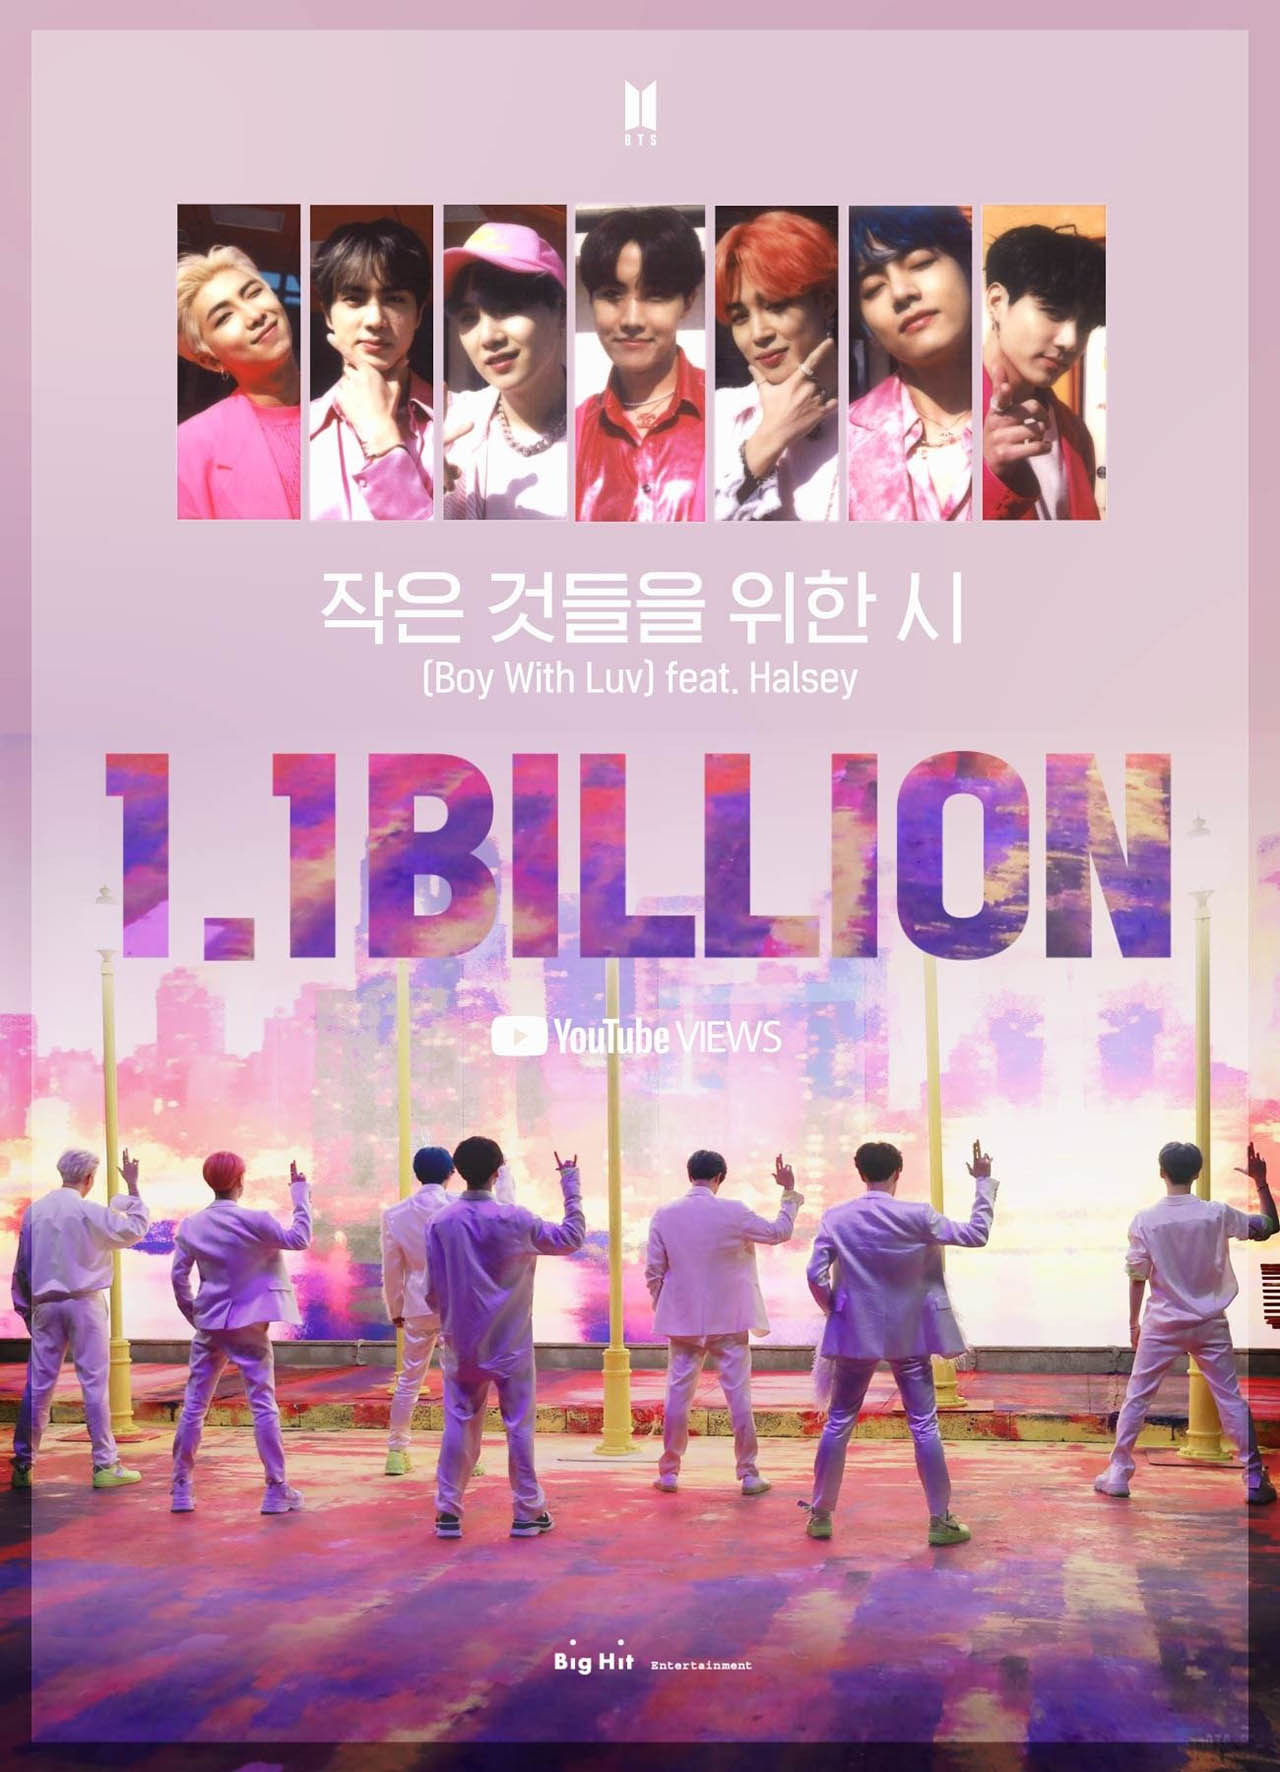 'Boy With Luv' becomes 2nd BTS music video to hit 1.1 bln views